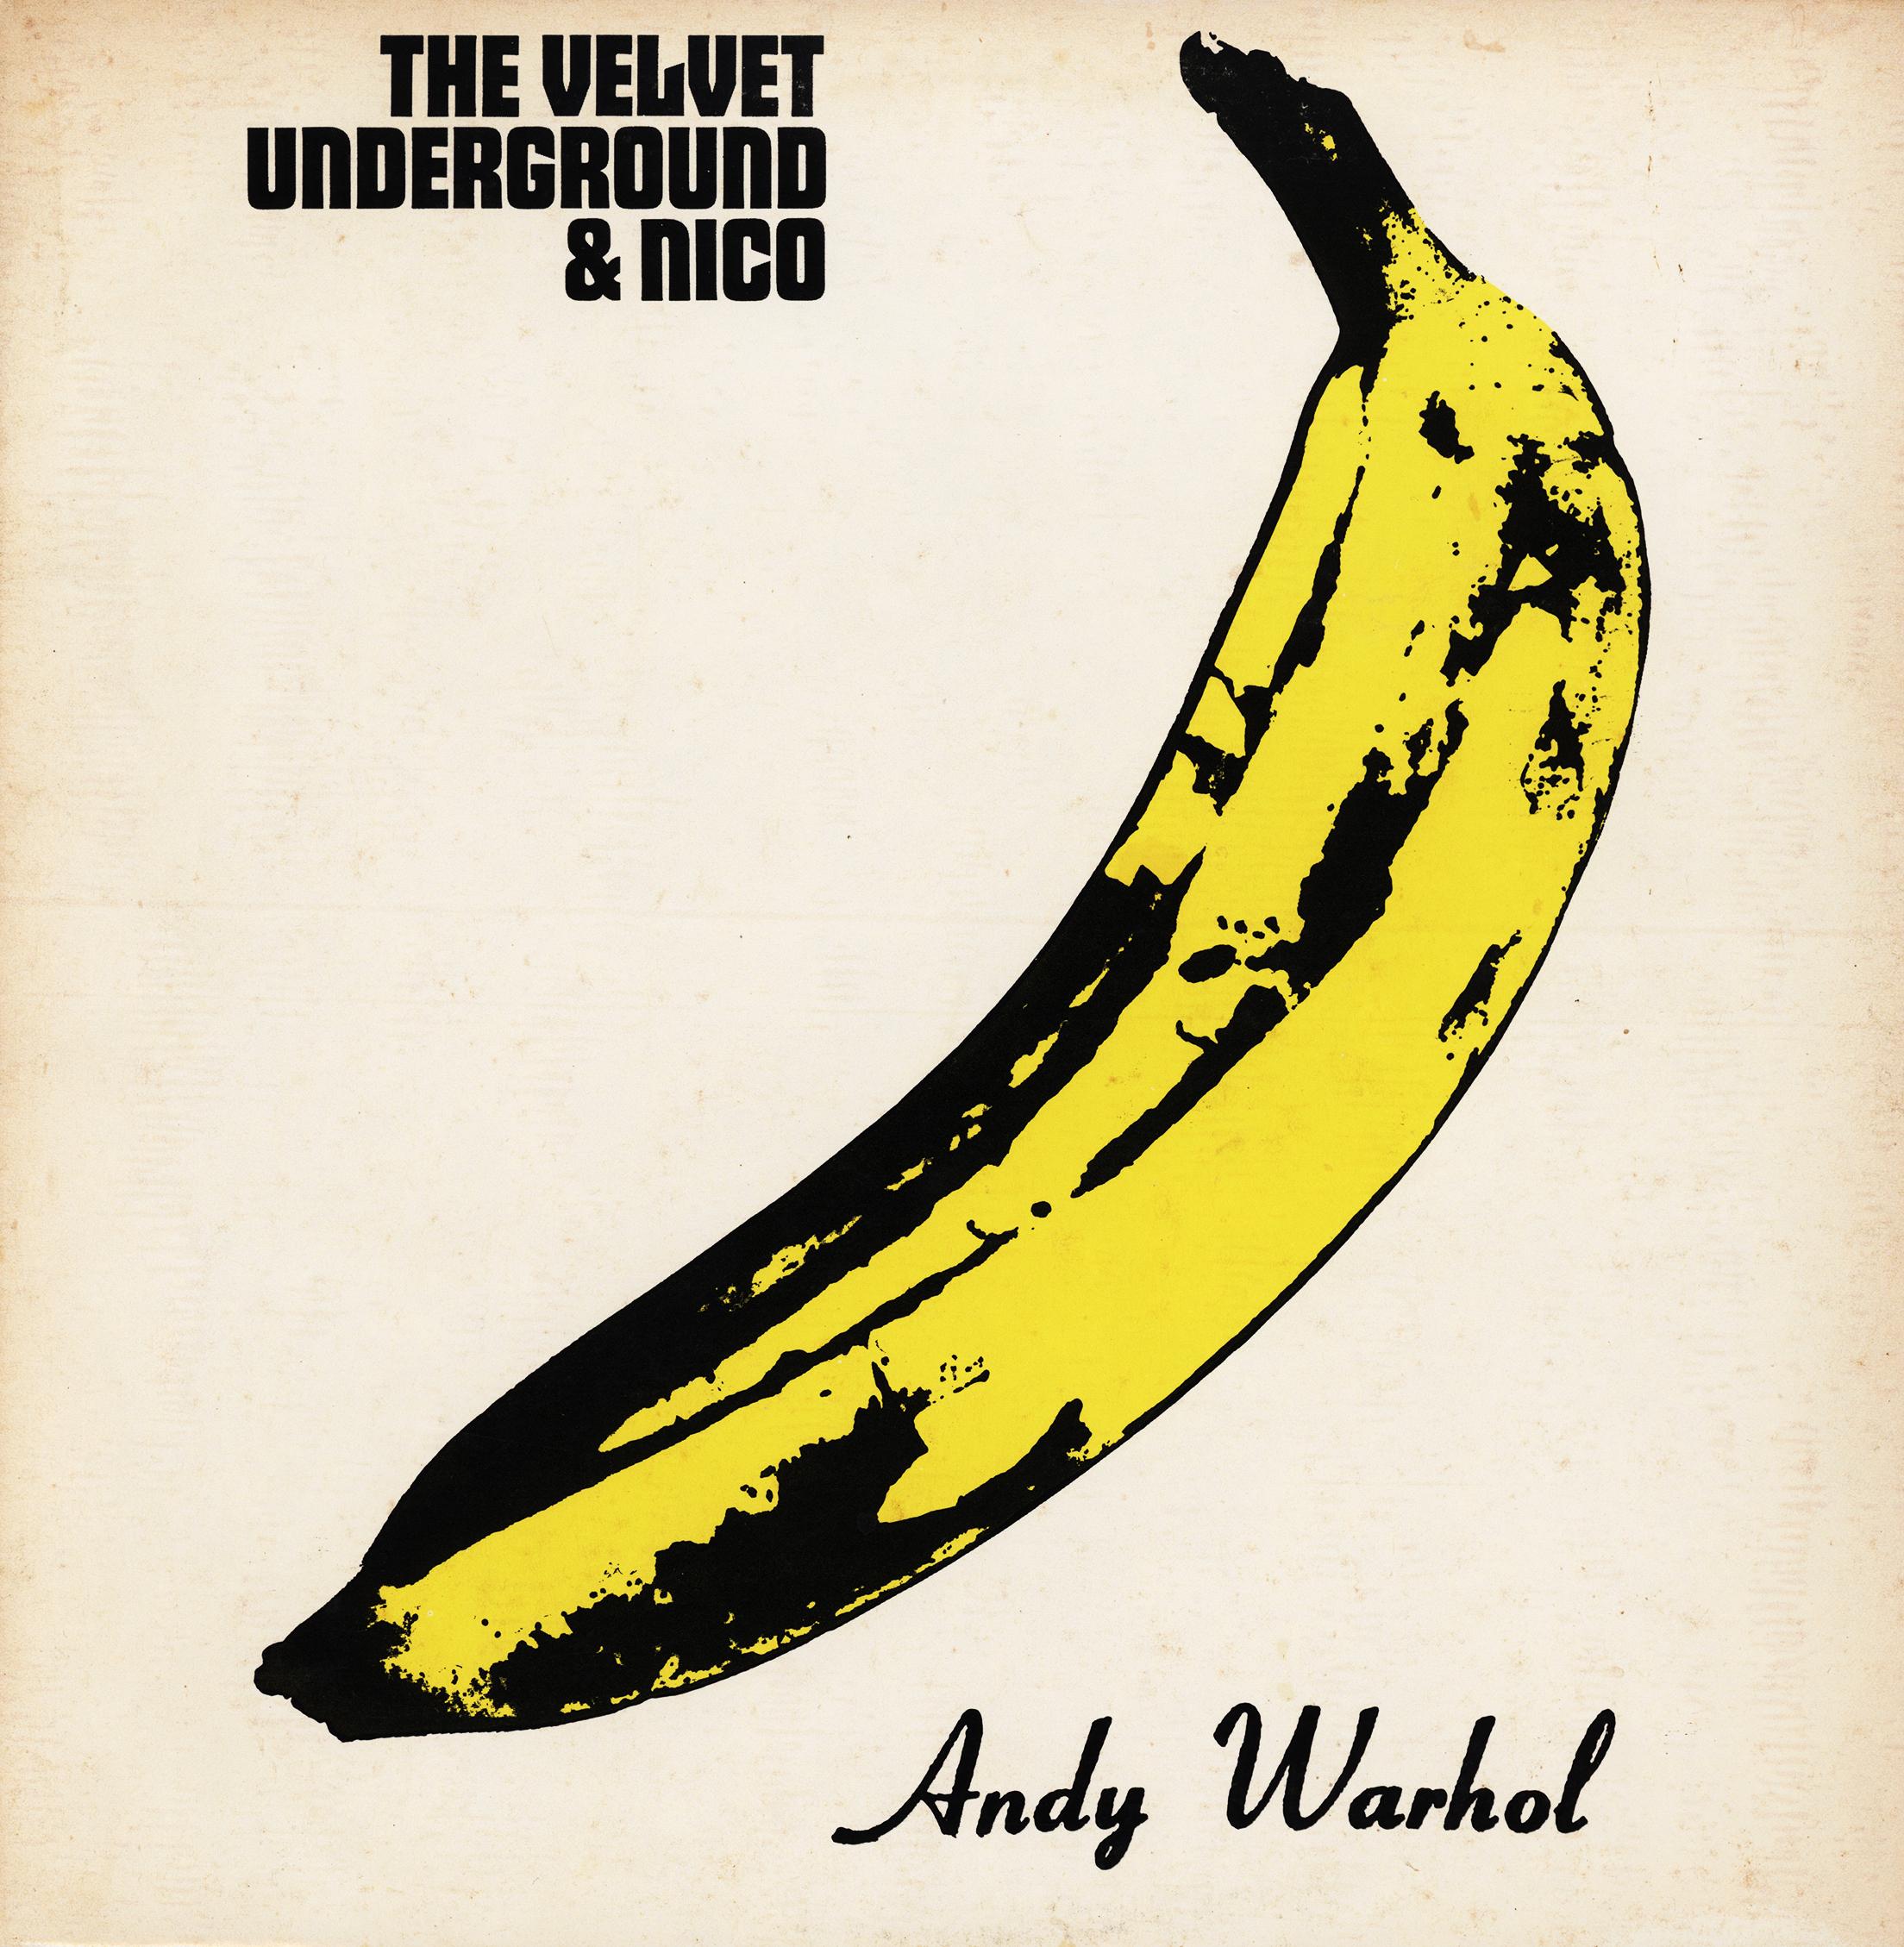 The Velvet Underground & Nico, Self-Titled, LP, 1985 - Art by Andy Warhol